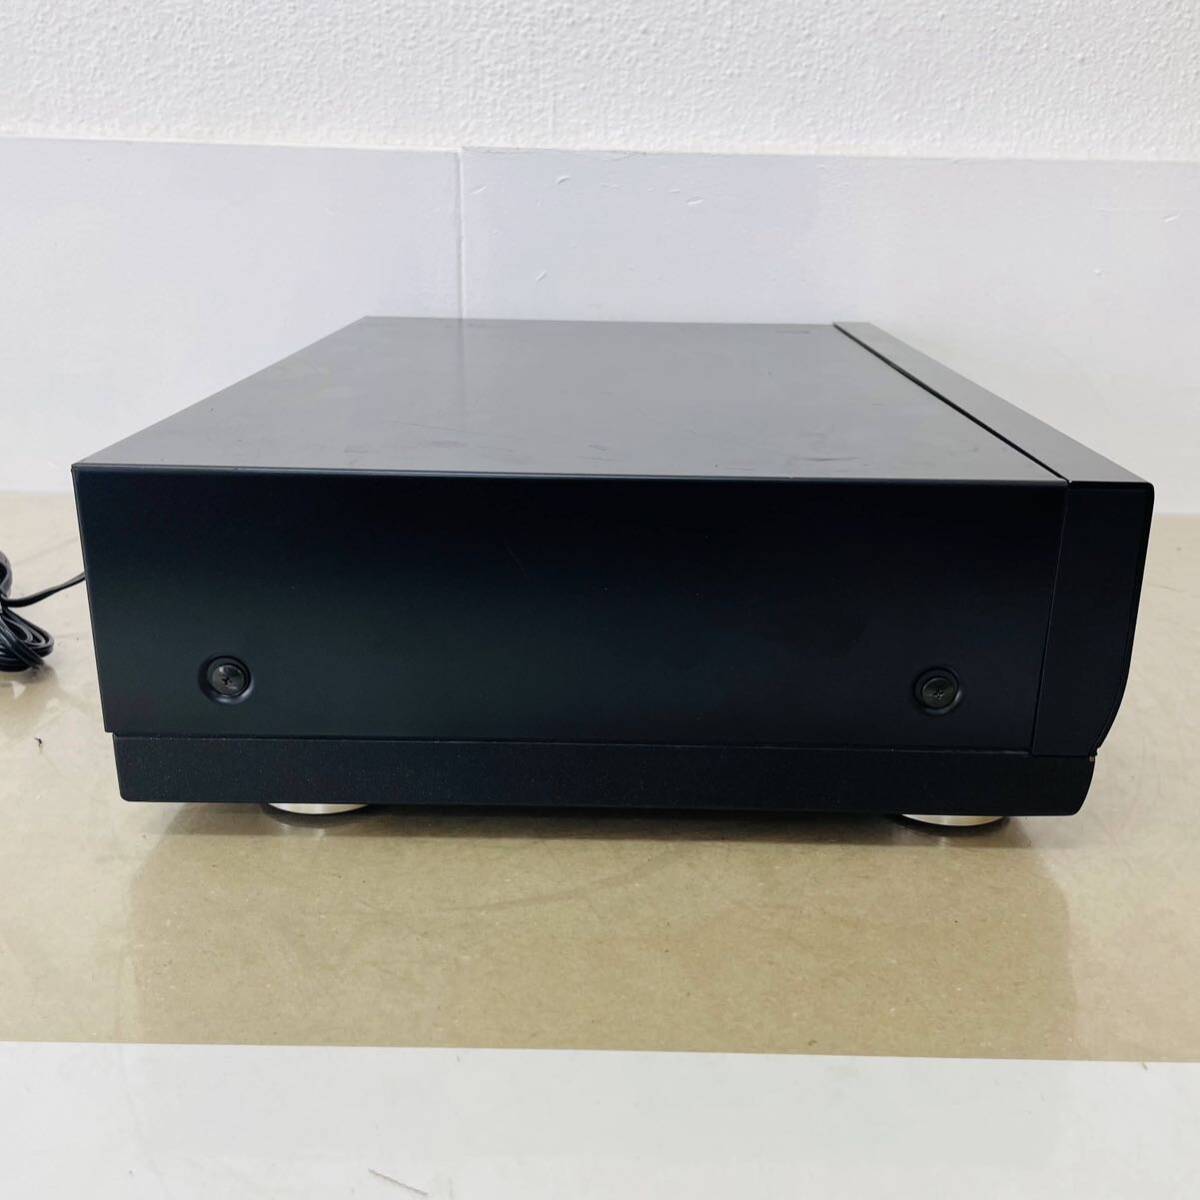 Panasonic SL-PS840 CD player sound out has confirmed i15813 120 size shipping 